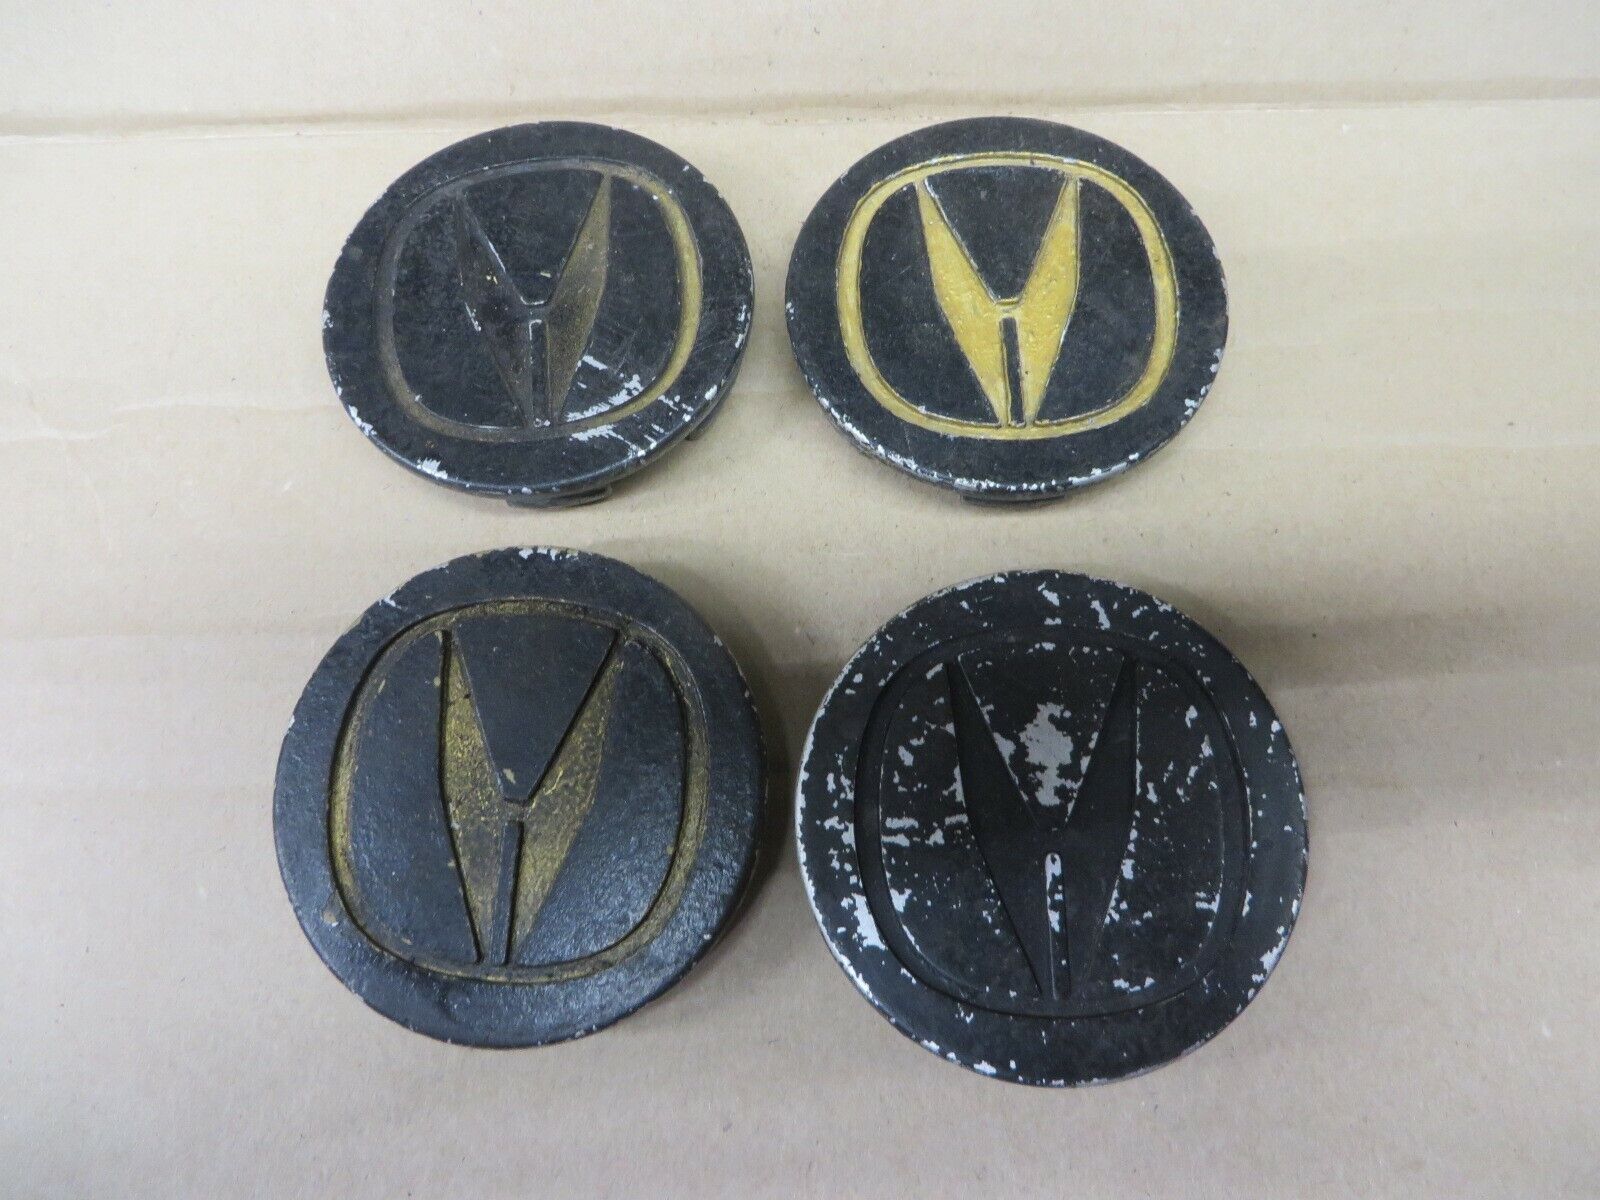 ACURA WHEEL CENTER CAP SET 4 OEM # 4732S6M00 ALTERED PAINTED RECON REQUIRED